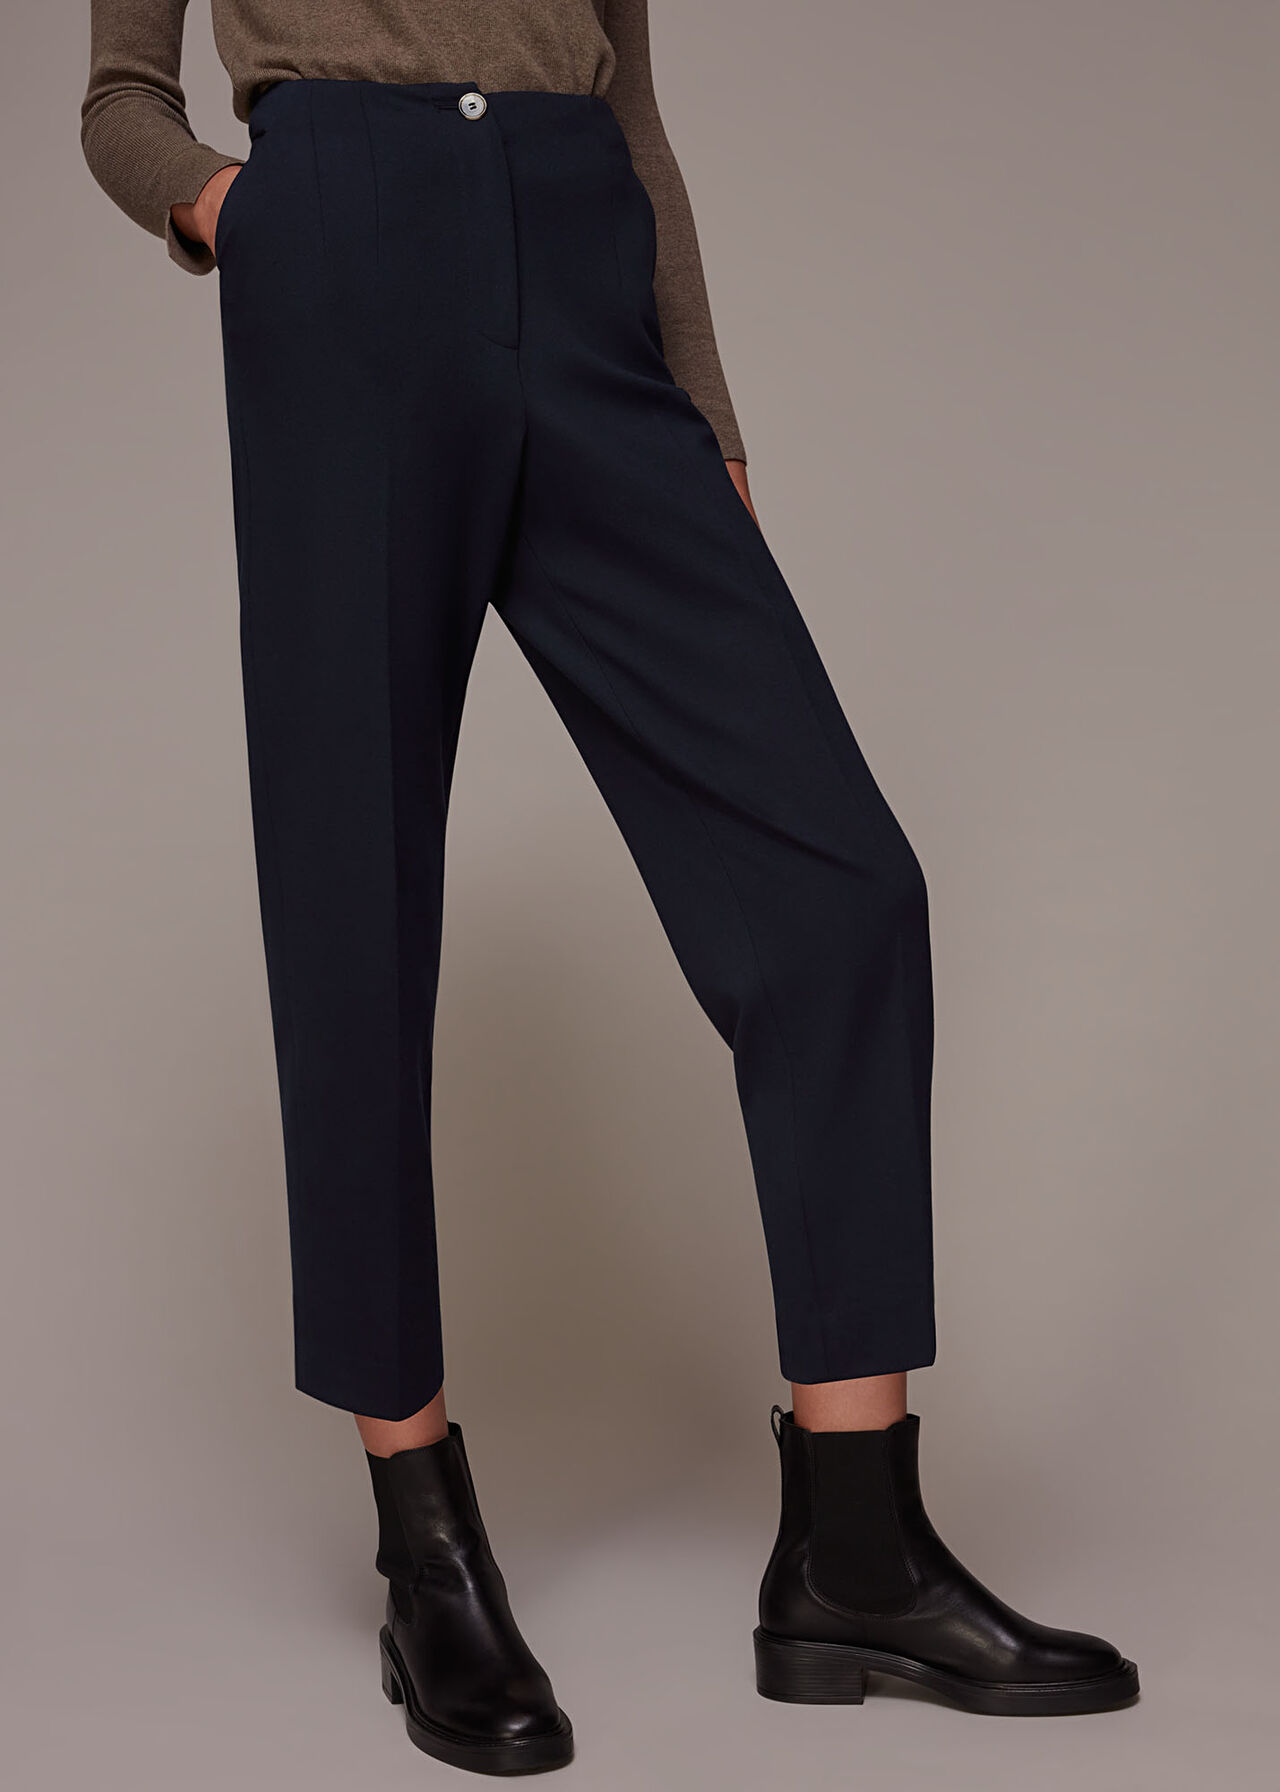 Lila Tapered Ponte Trouser